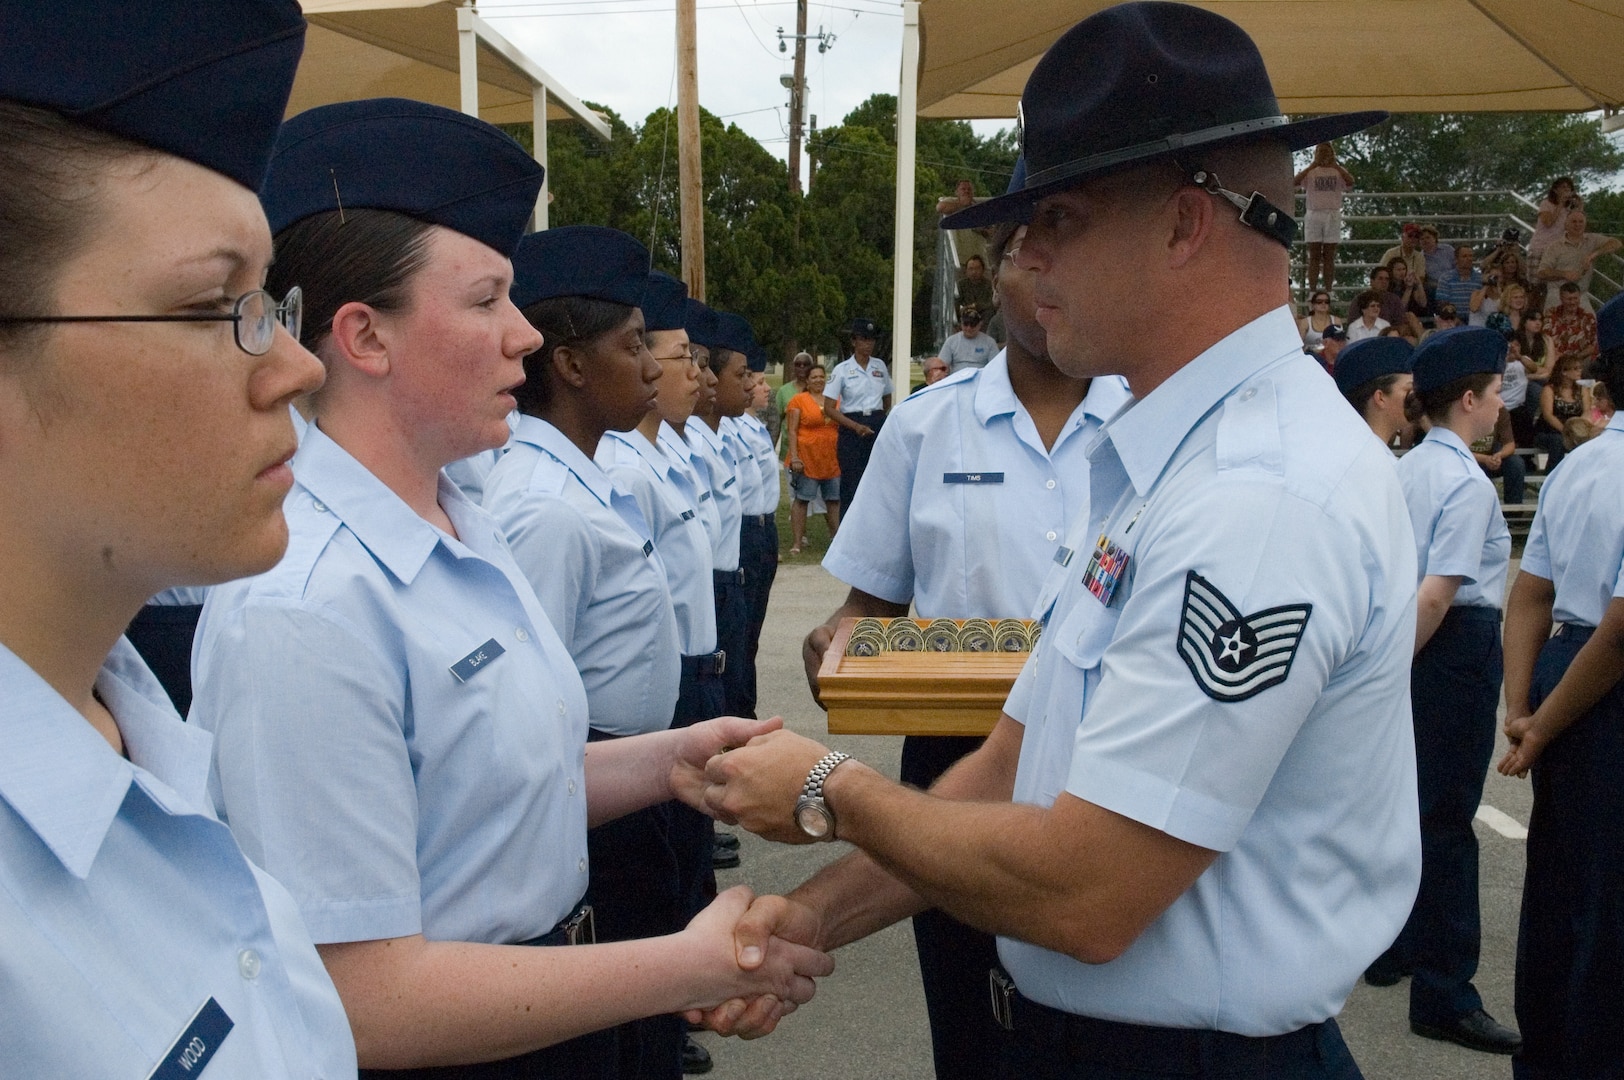 An Airman receives her Airman’s Coin from her Military Training Instructor at the coin ceremony during graduation week events at Joint Base San Antonio-Lackland. The coin ceremony signifies the transition of trainee to Airman.